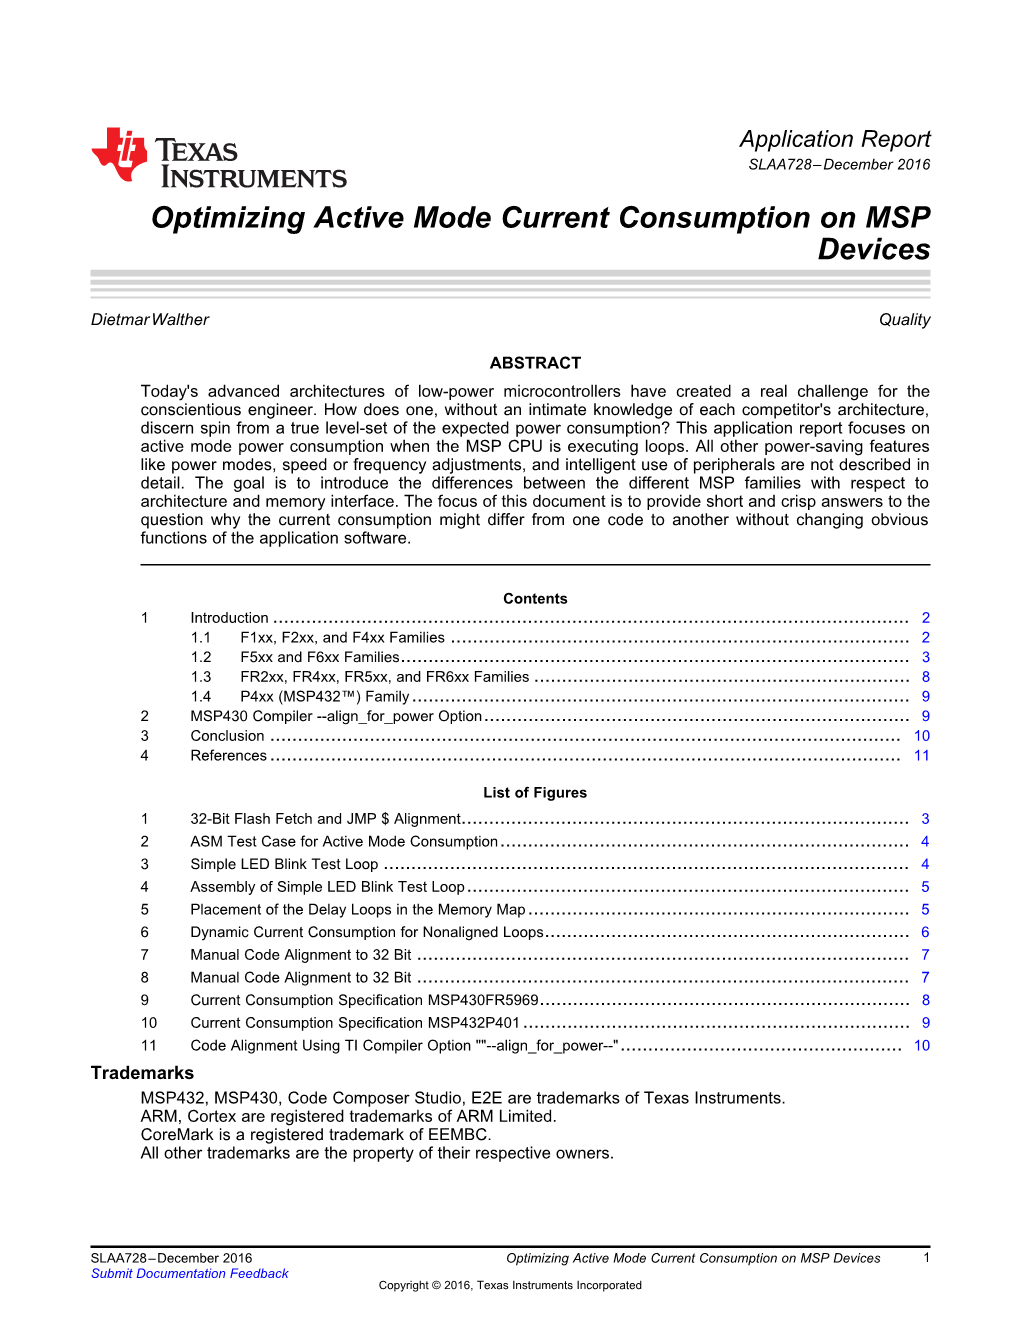 Optimizing Active Mode Current Consumption on MSP Devices